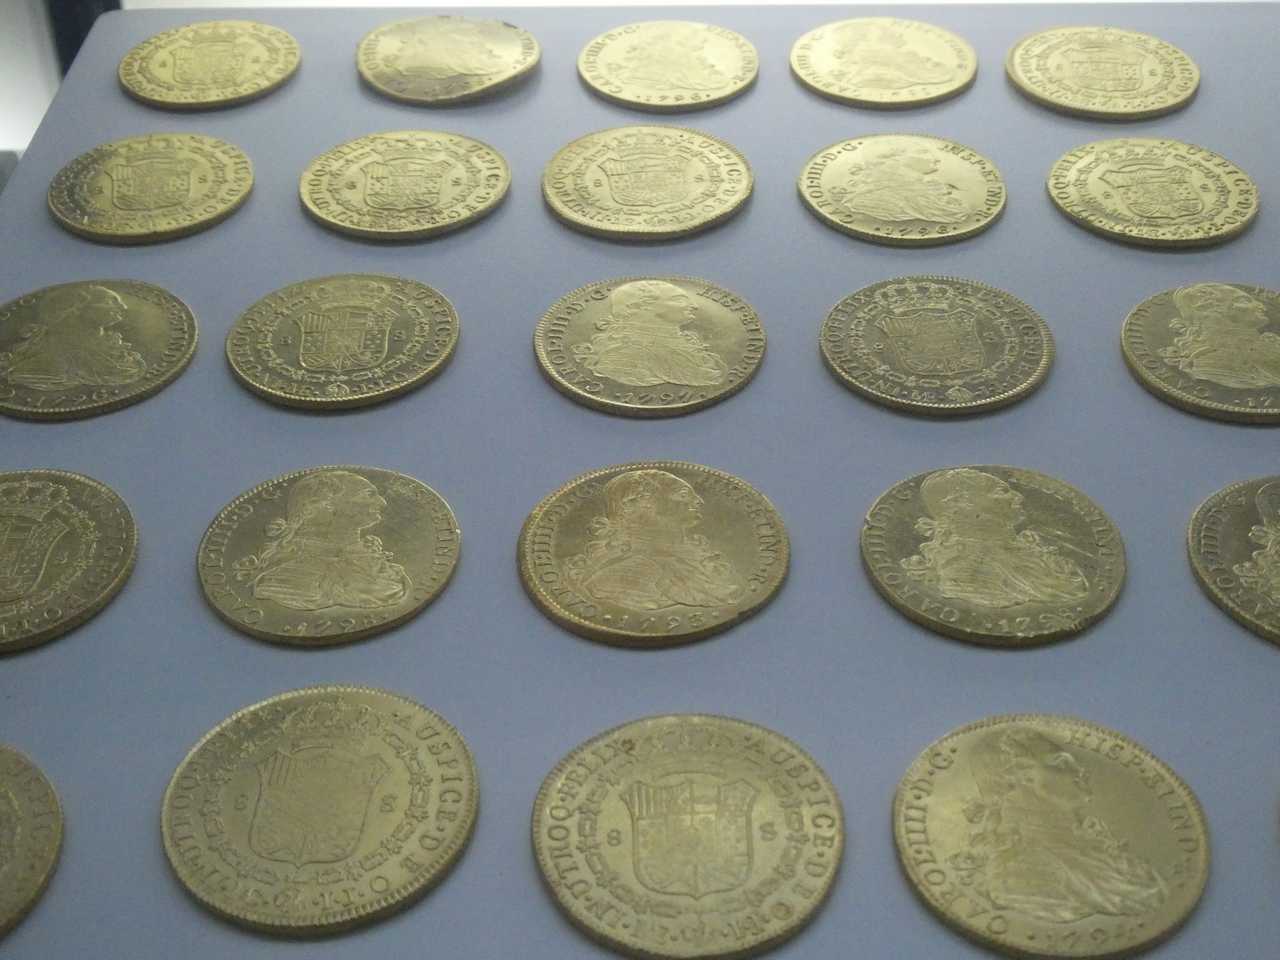 Stolen pieces of 8, made from stolen gold.